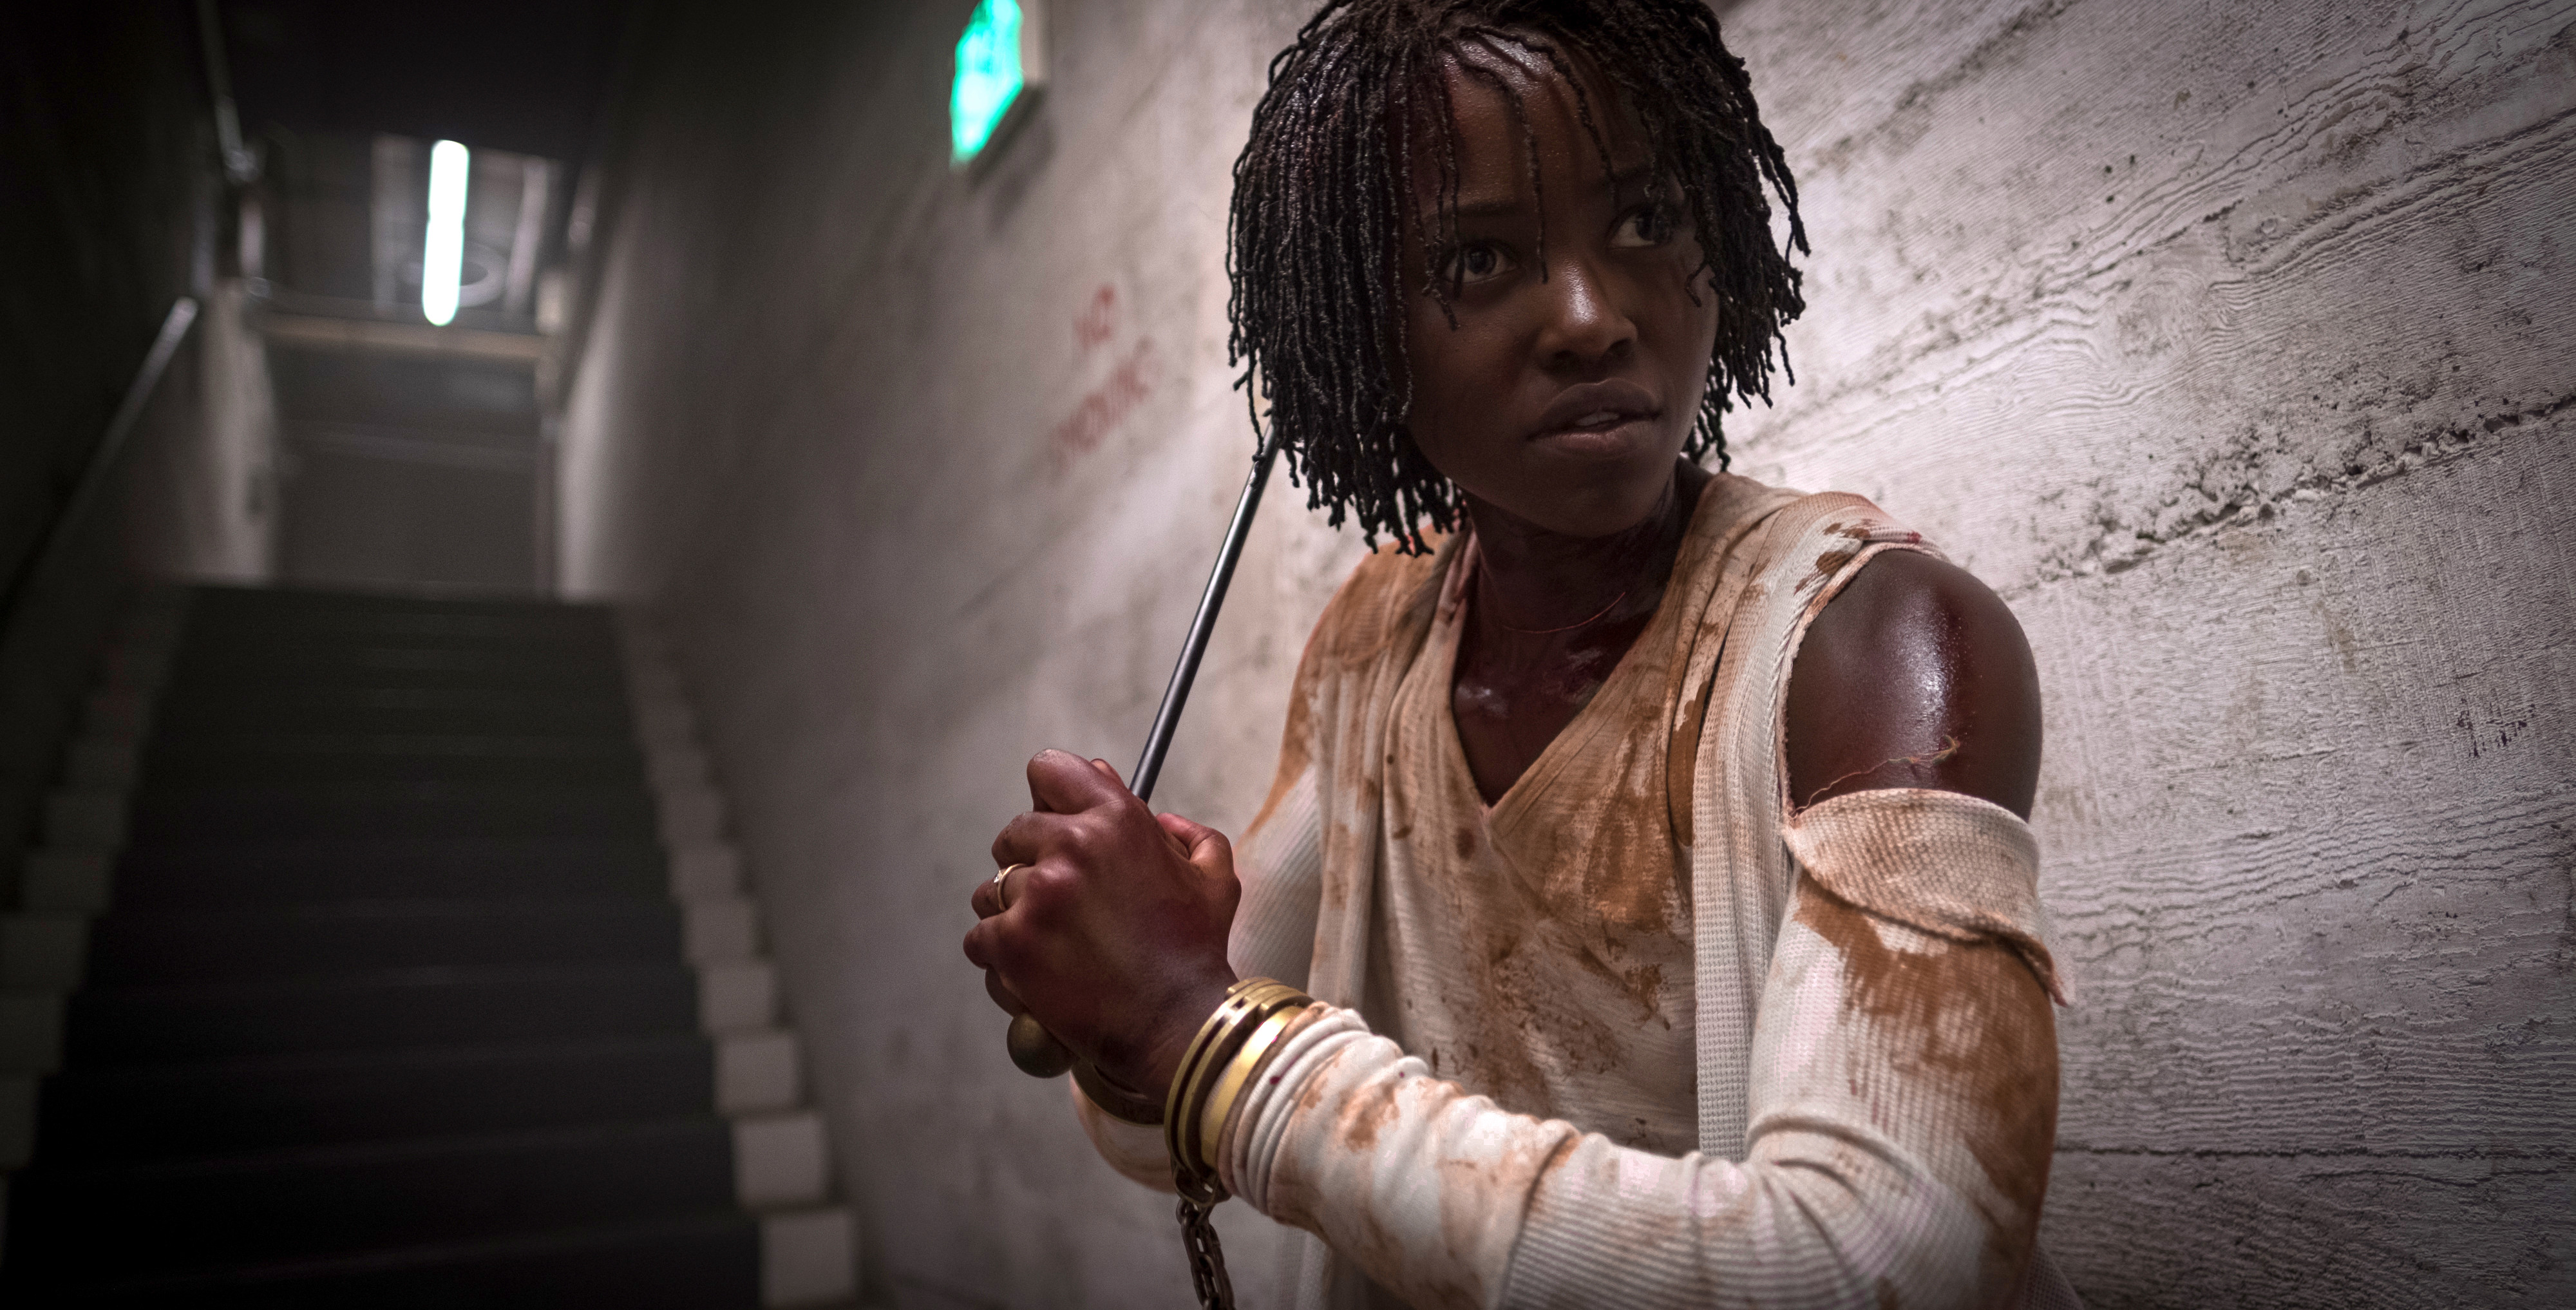 Jordan Peele’s ‘Us’ Is a Classic Horror Experience Reimagined – Review